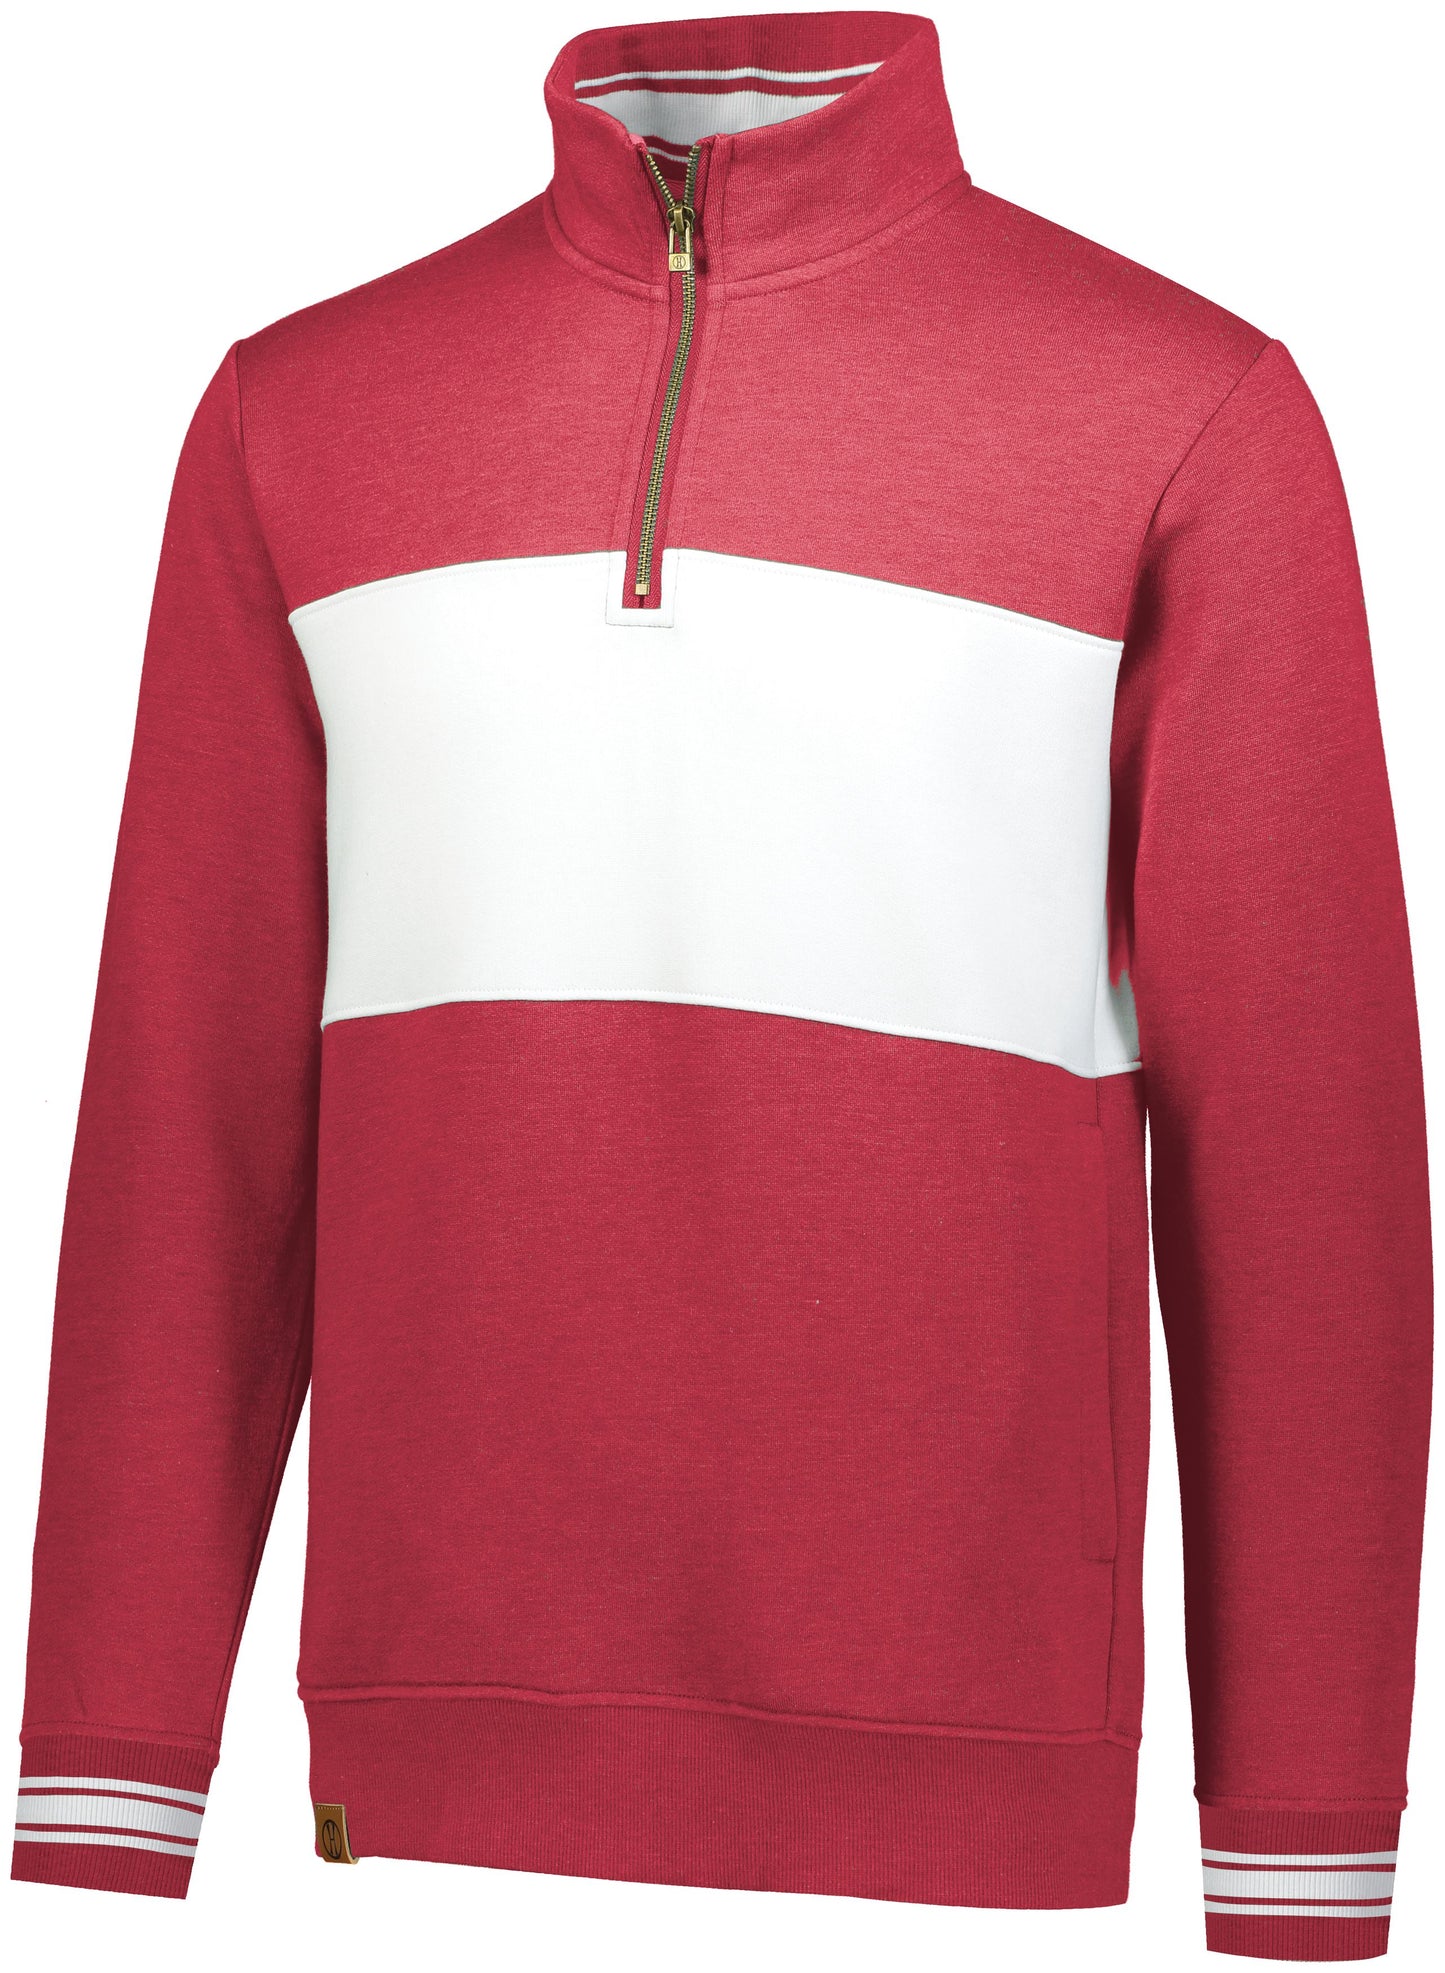 HOLLOWAY - IVY LEAGUE PULLOVER